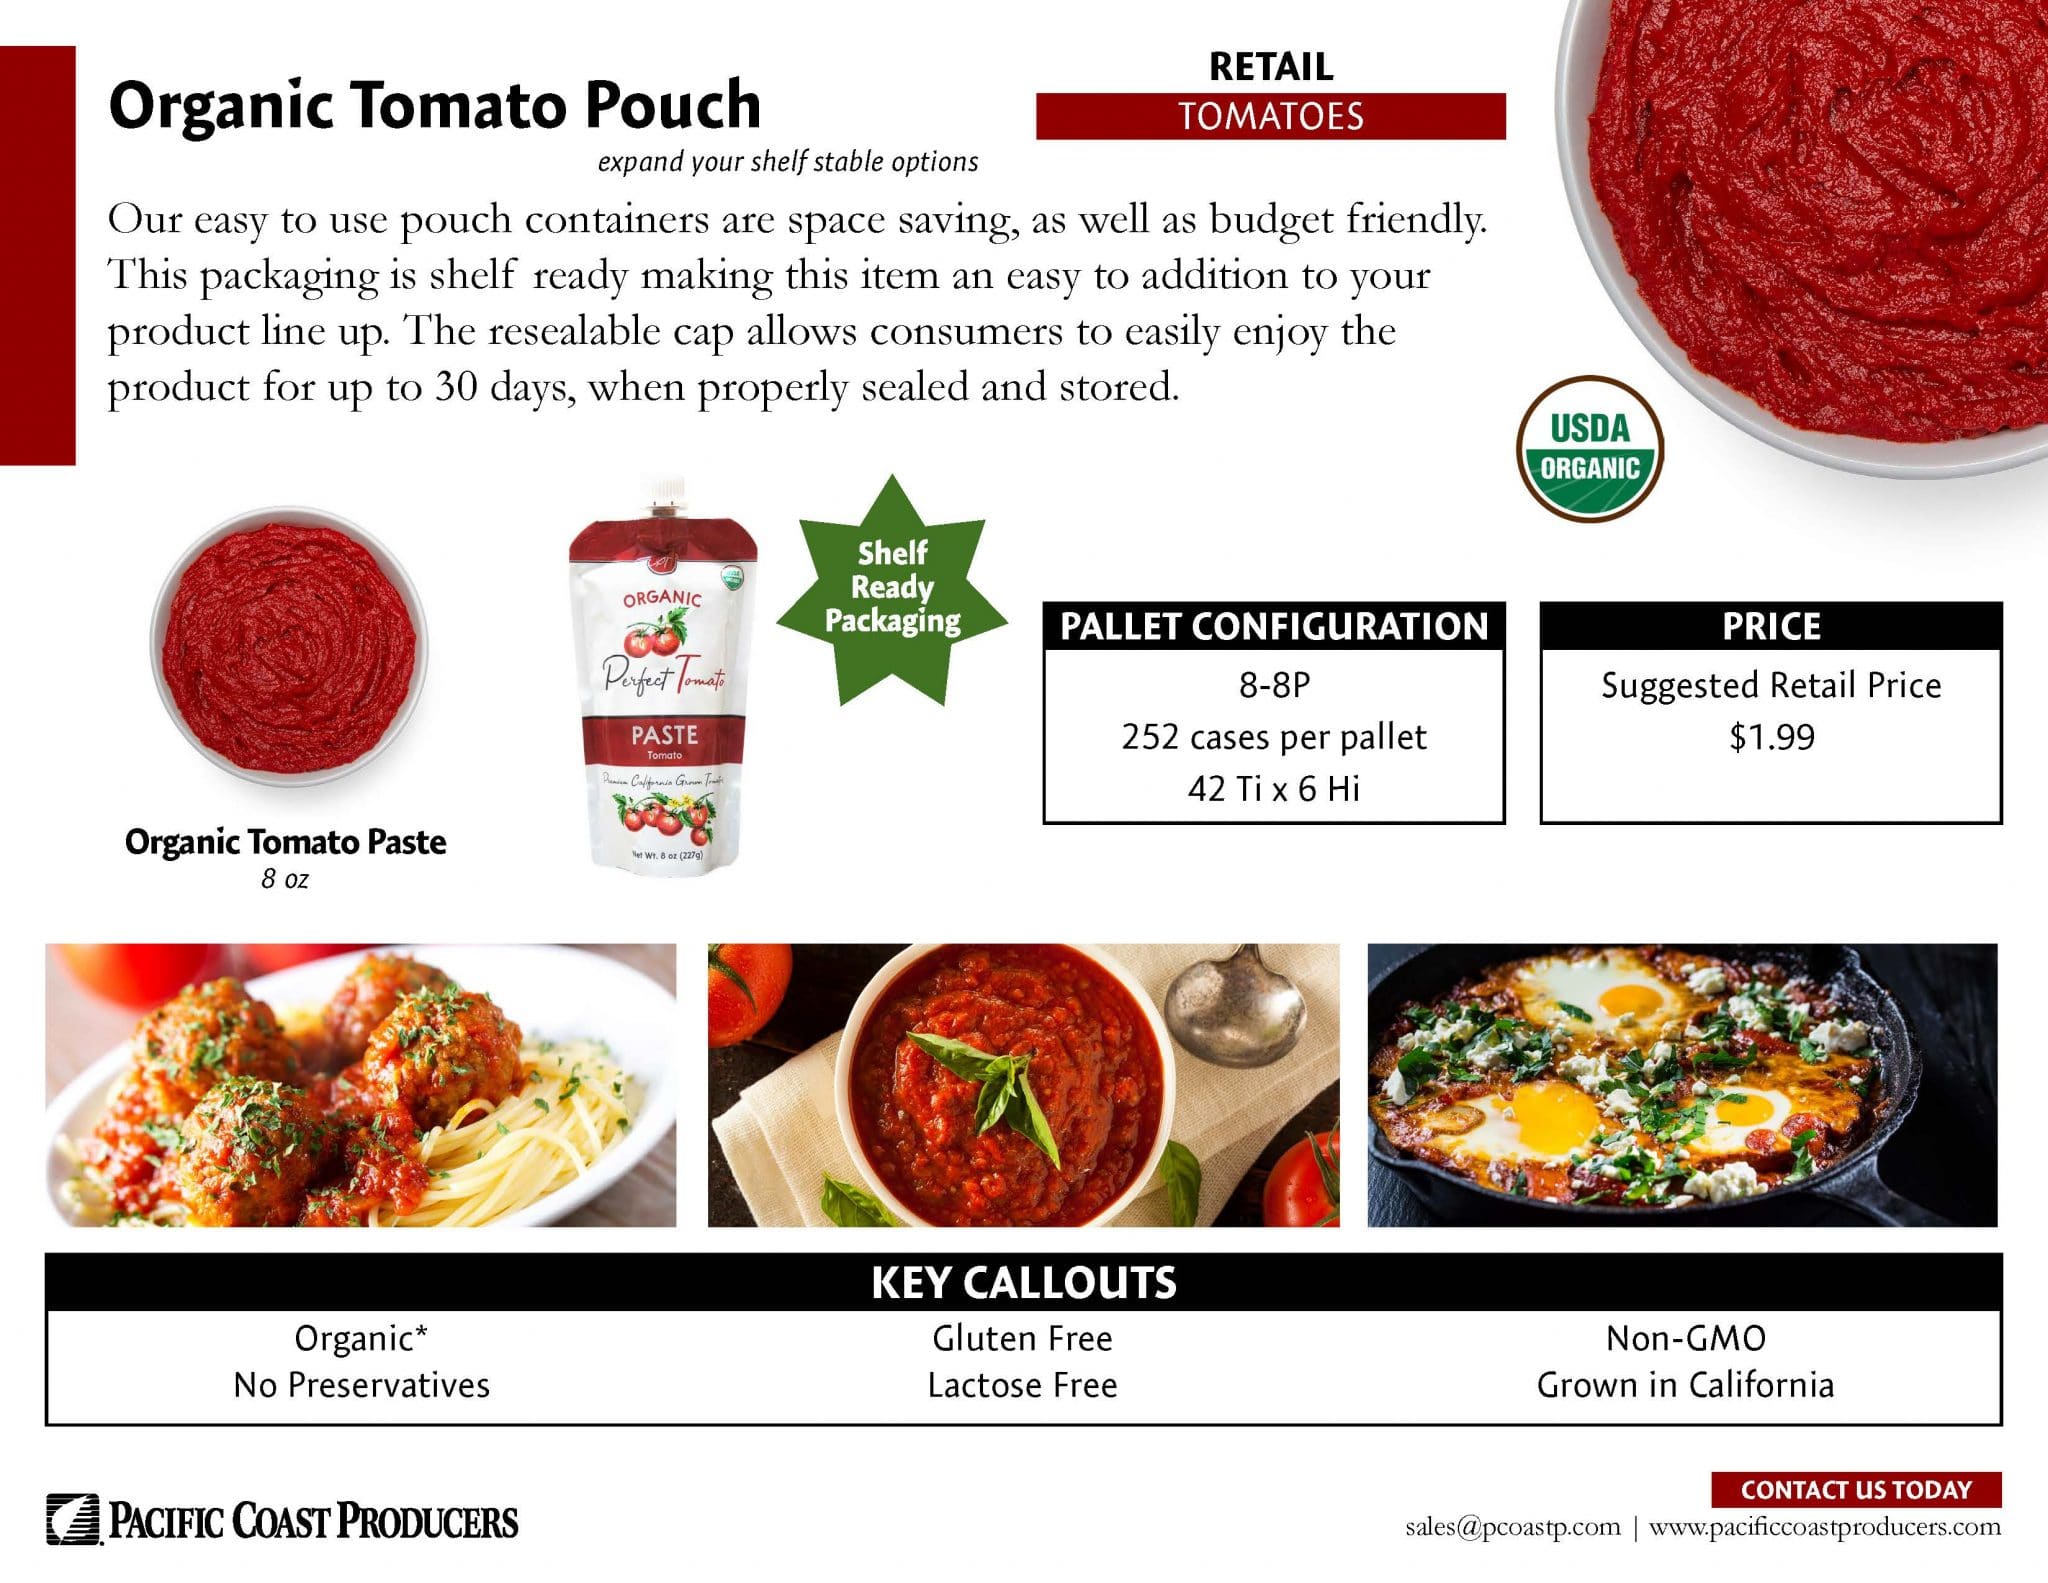 A flyer for organic tomato pouches.